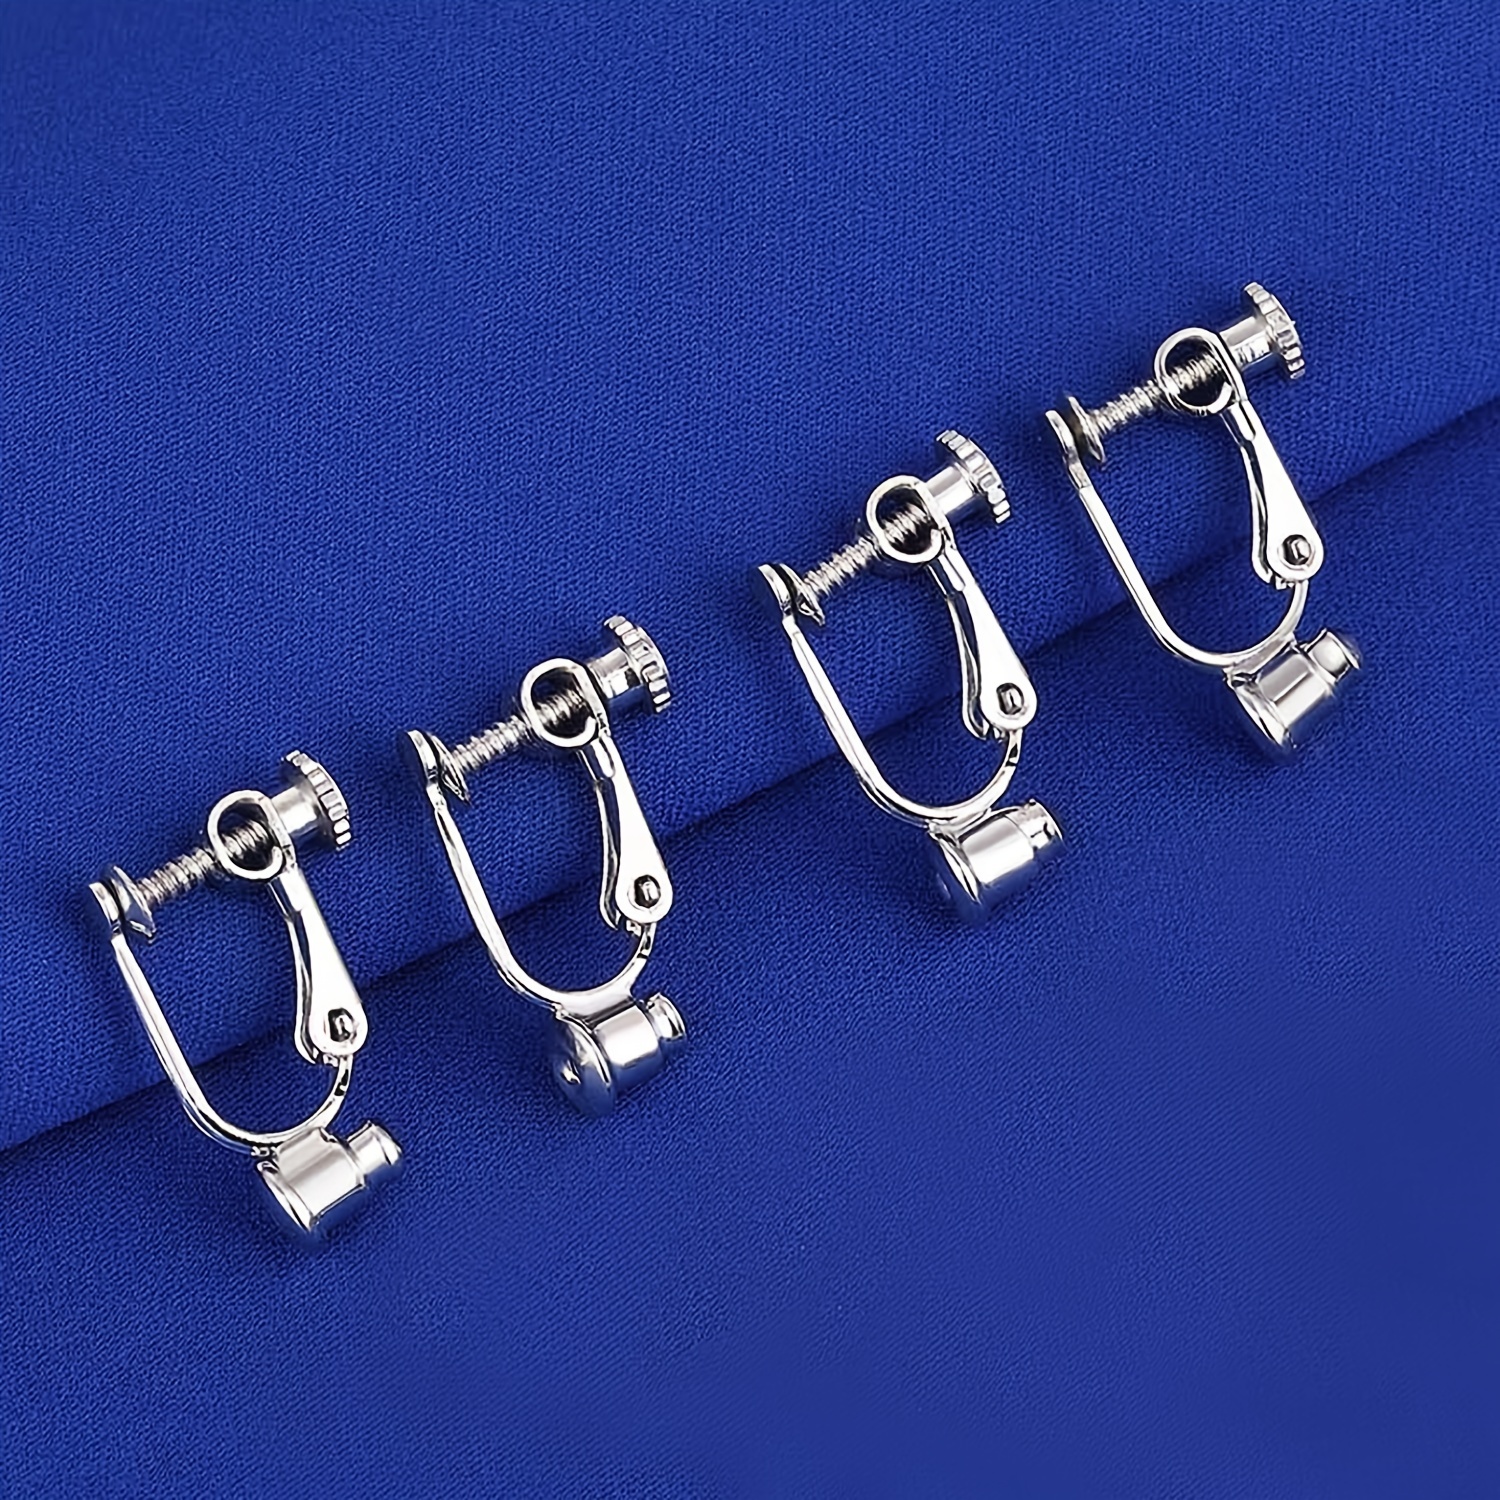 Earring hooks, ear wires, short with loop for jewelry making, Silver, 3  pair